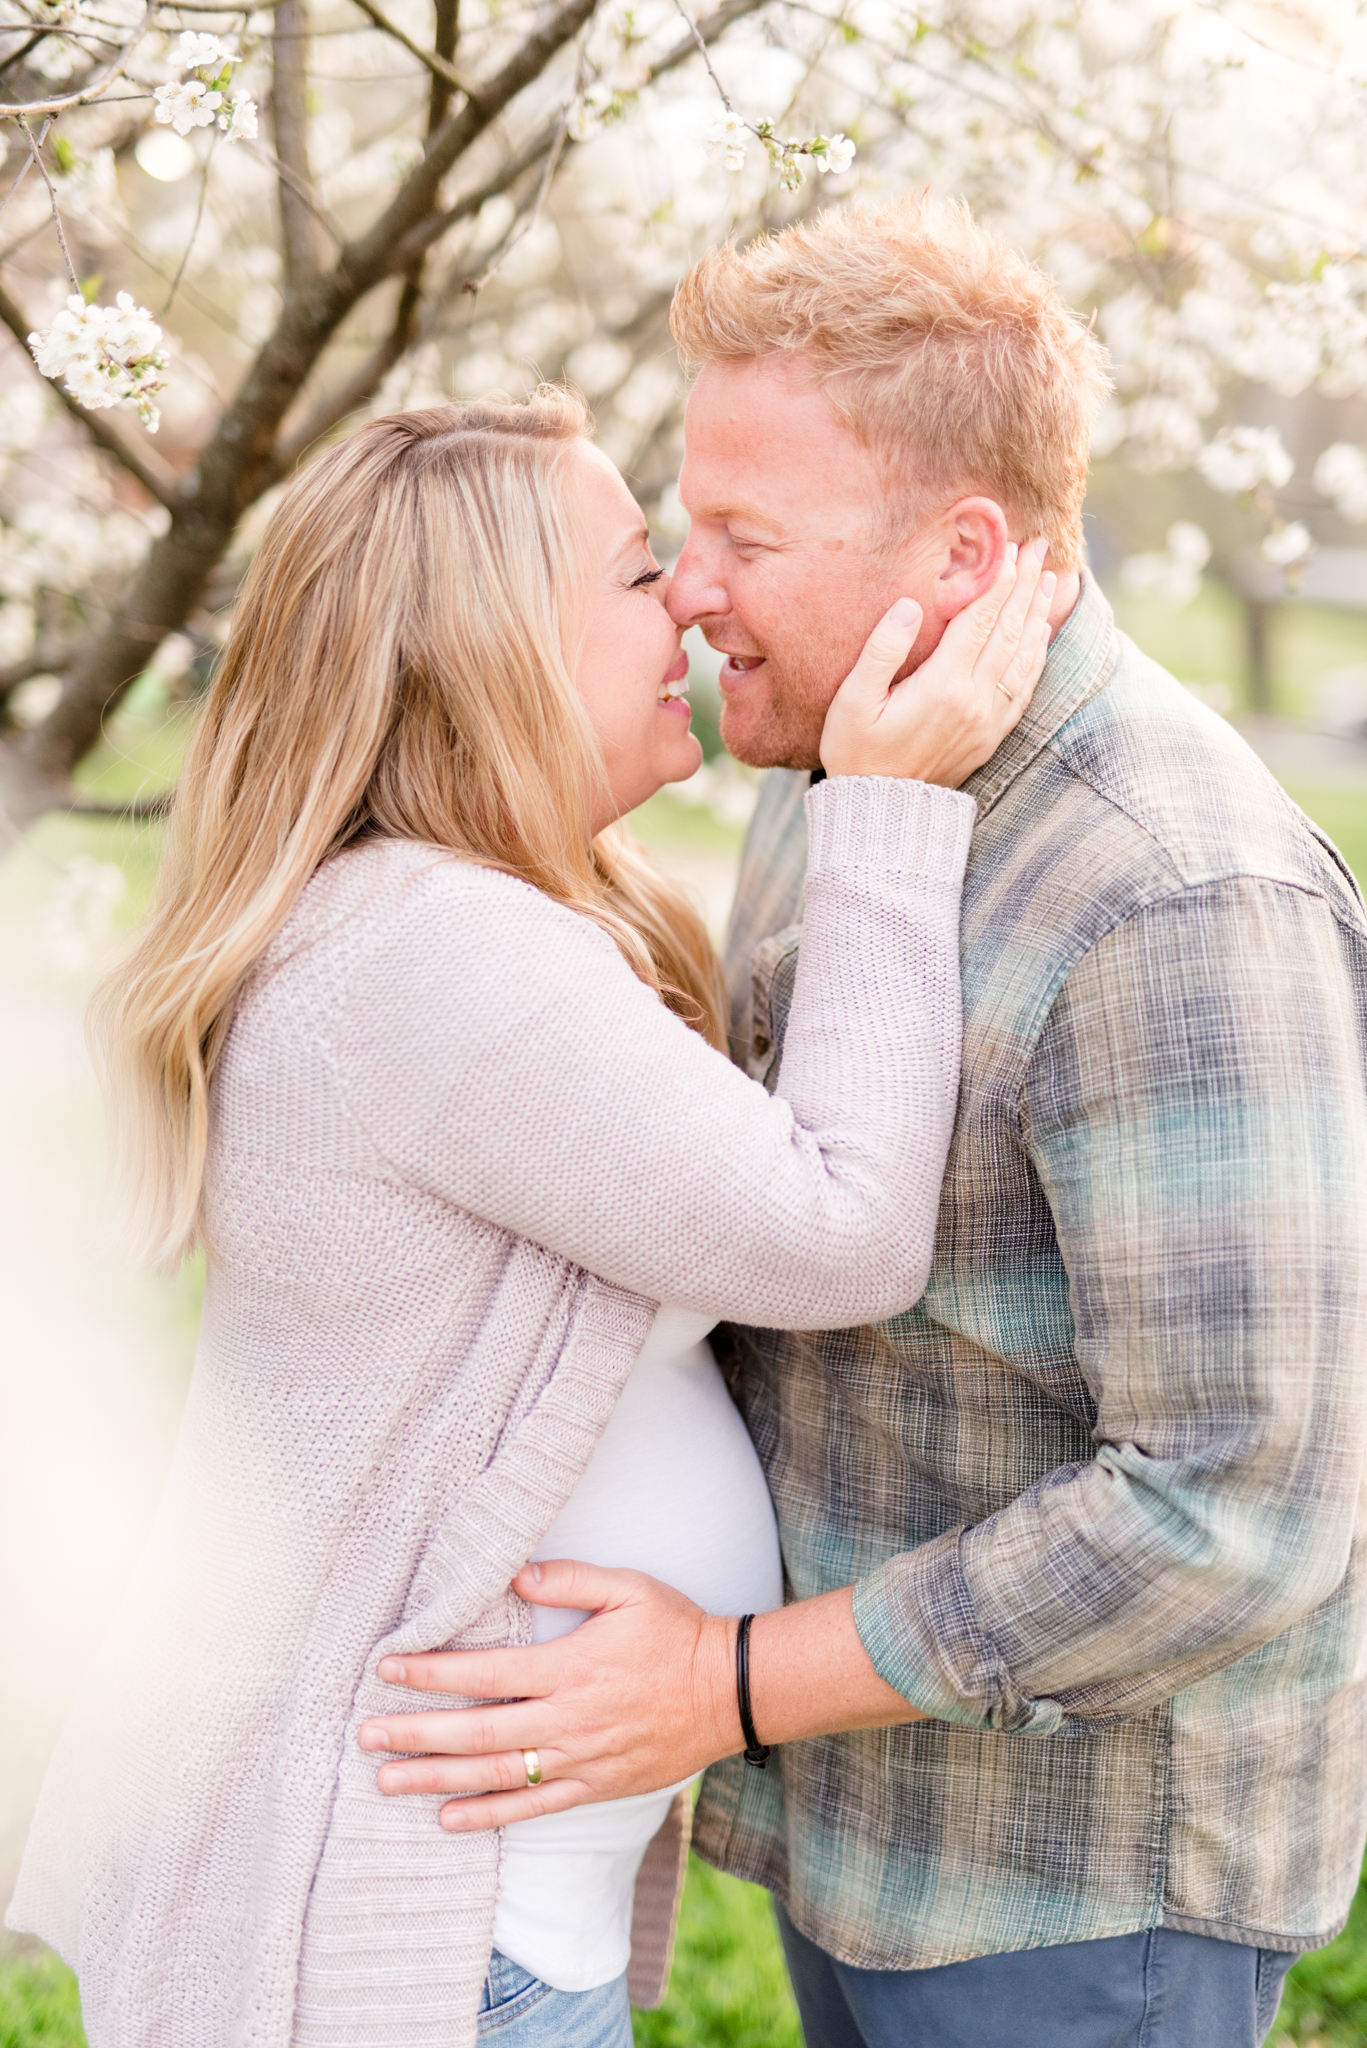 Expecting parents lean in for a kiss under spring blooms.